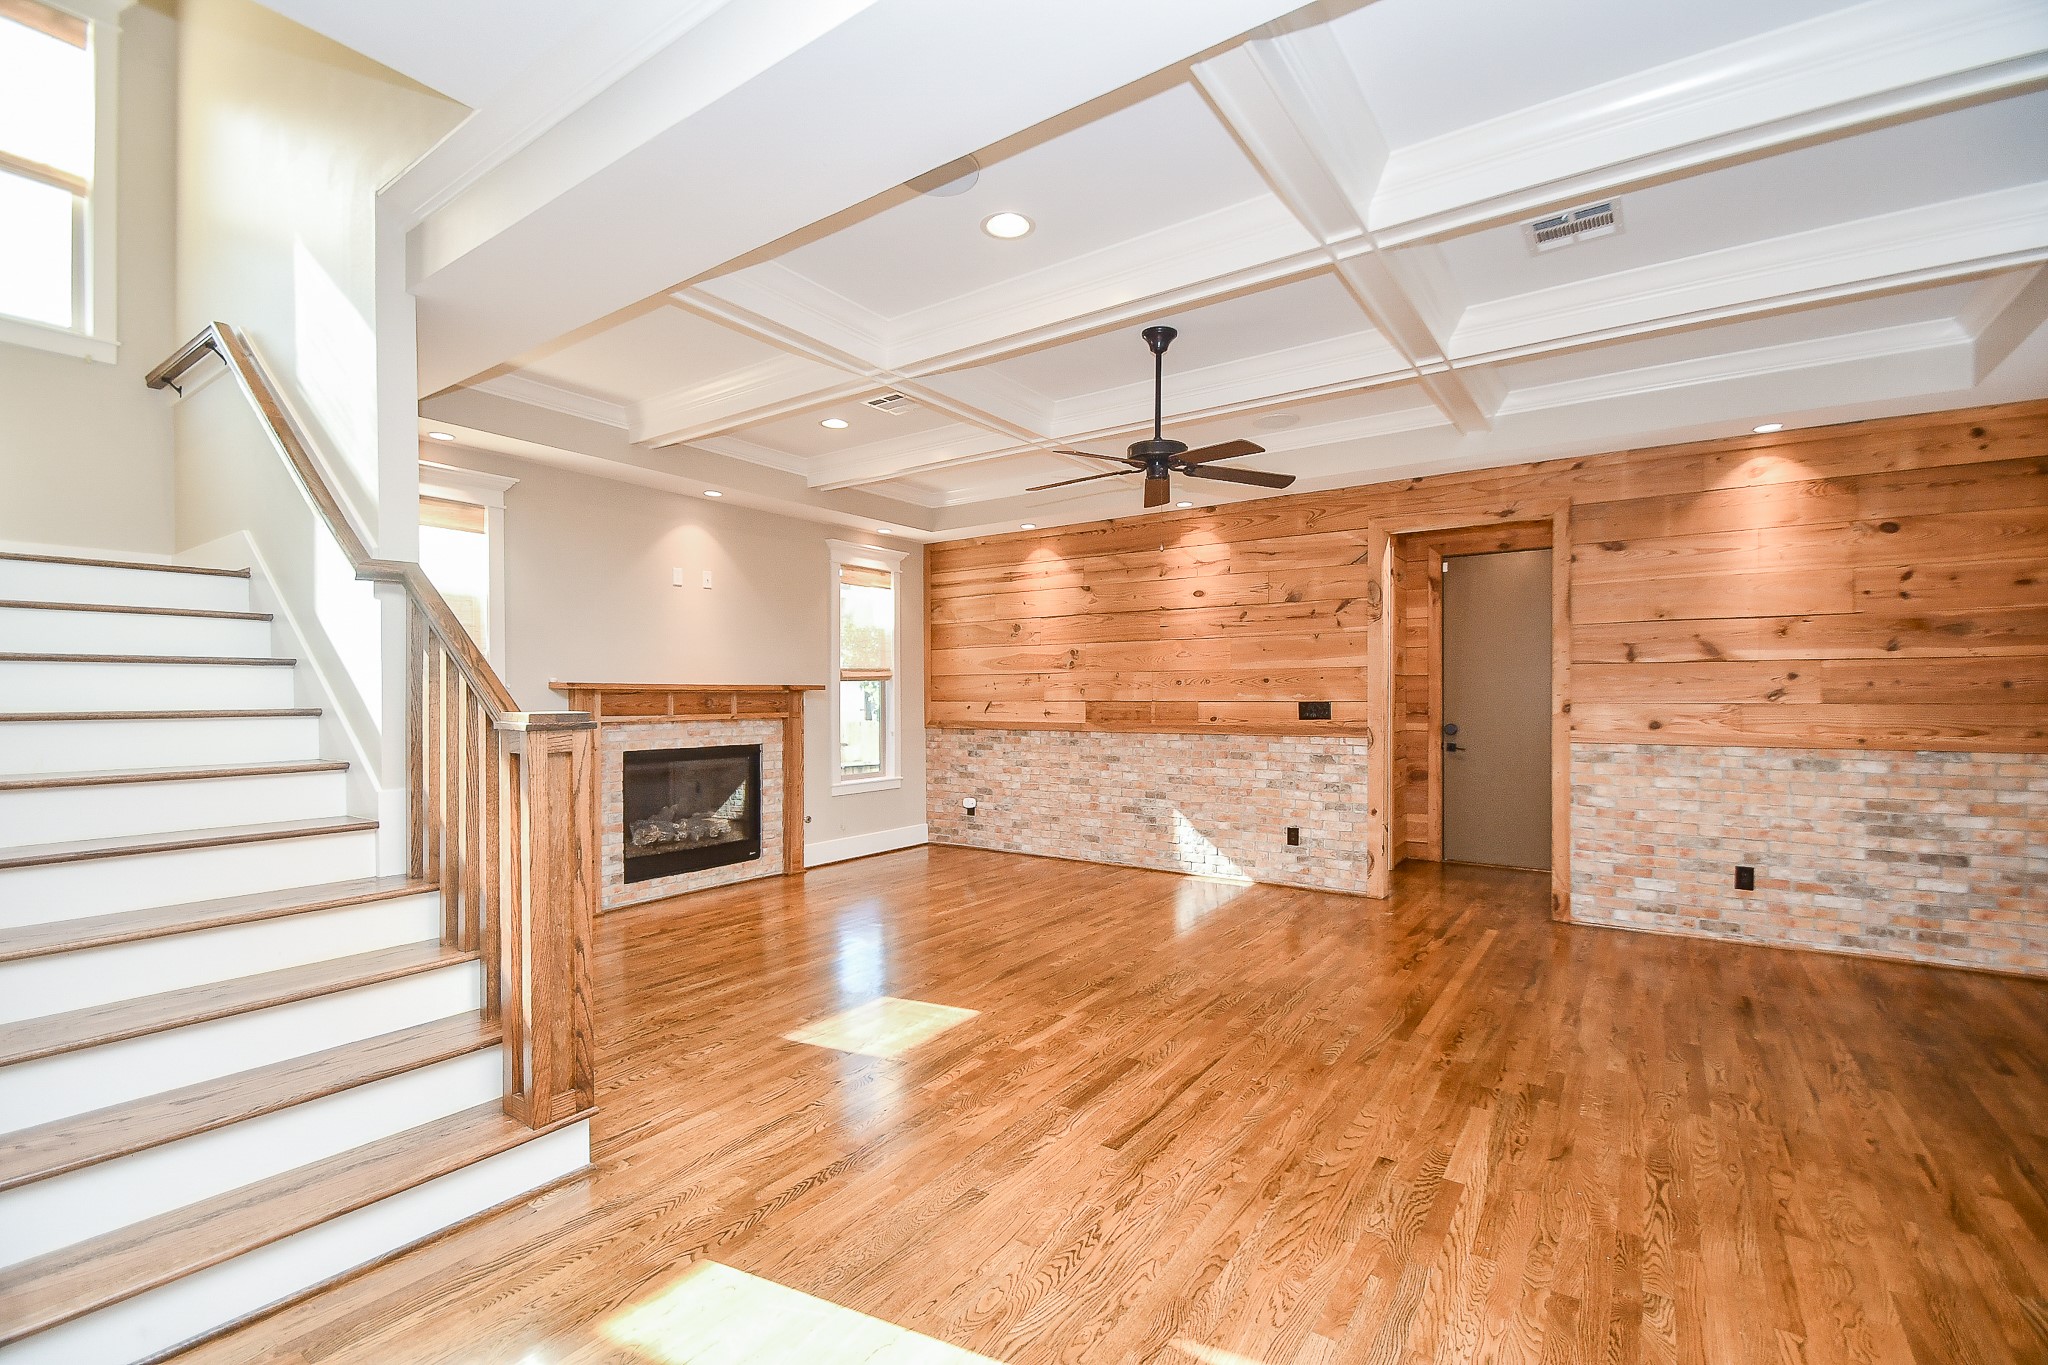 Hardwood floors throughout and a fireplace to bring a cozy feeling to the living area